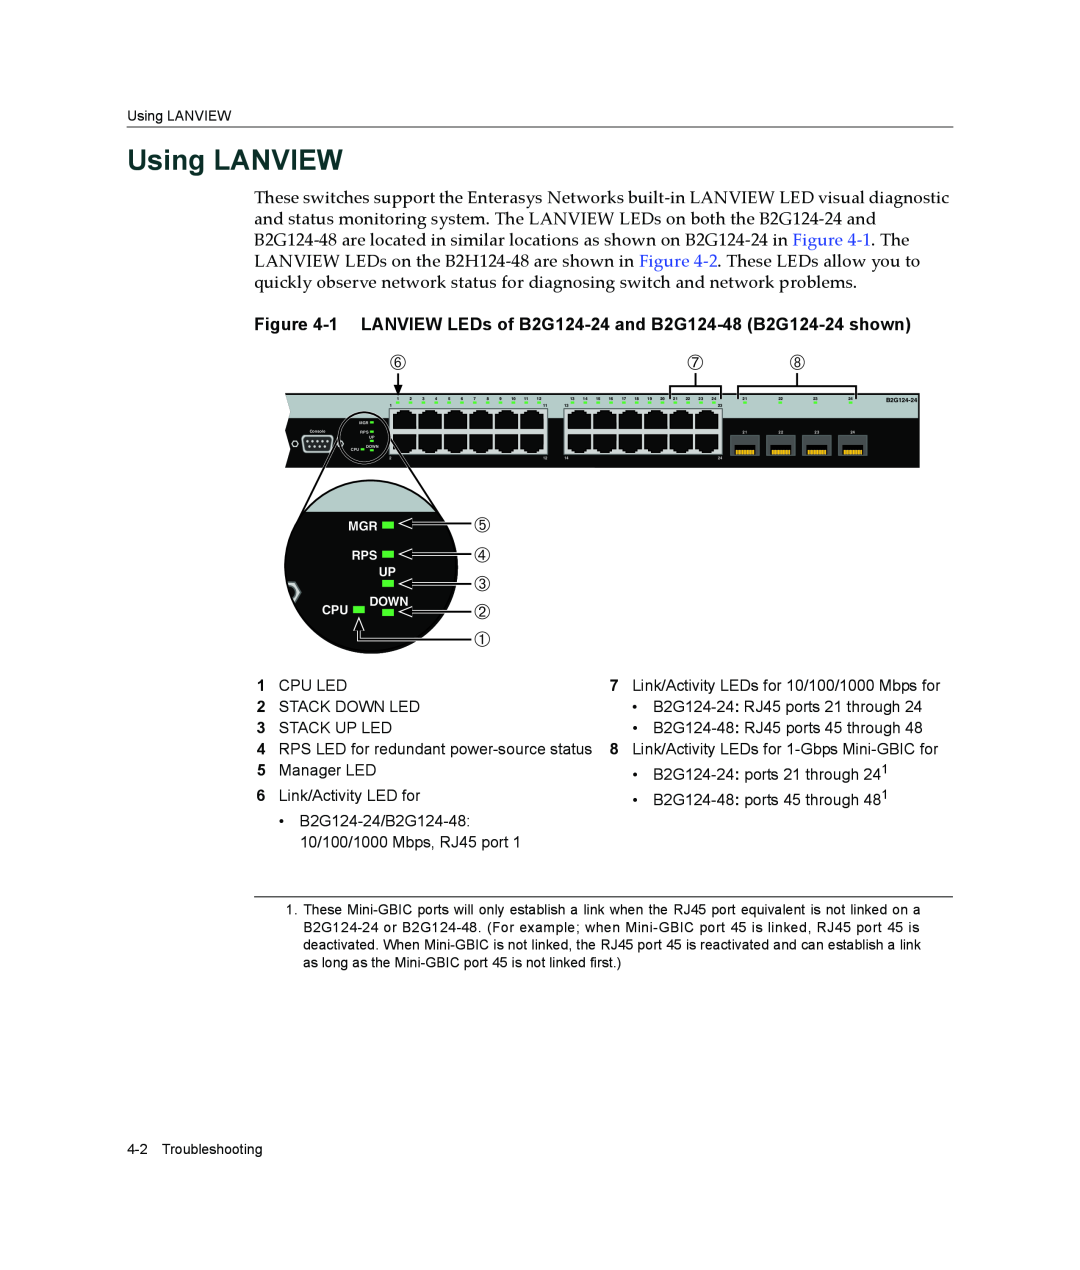 Enterasys Networks manual Using LANVIEW, 1 LANVIEW LEDs of B2G124-24 and B2G124-48 B2G124-24 shown 